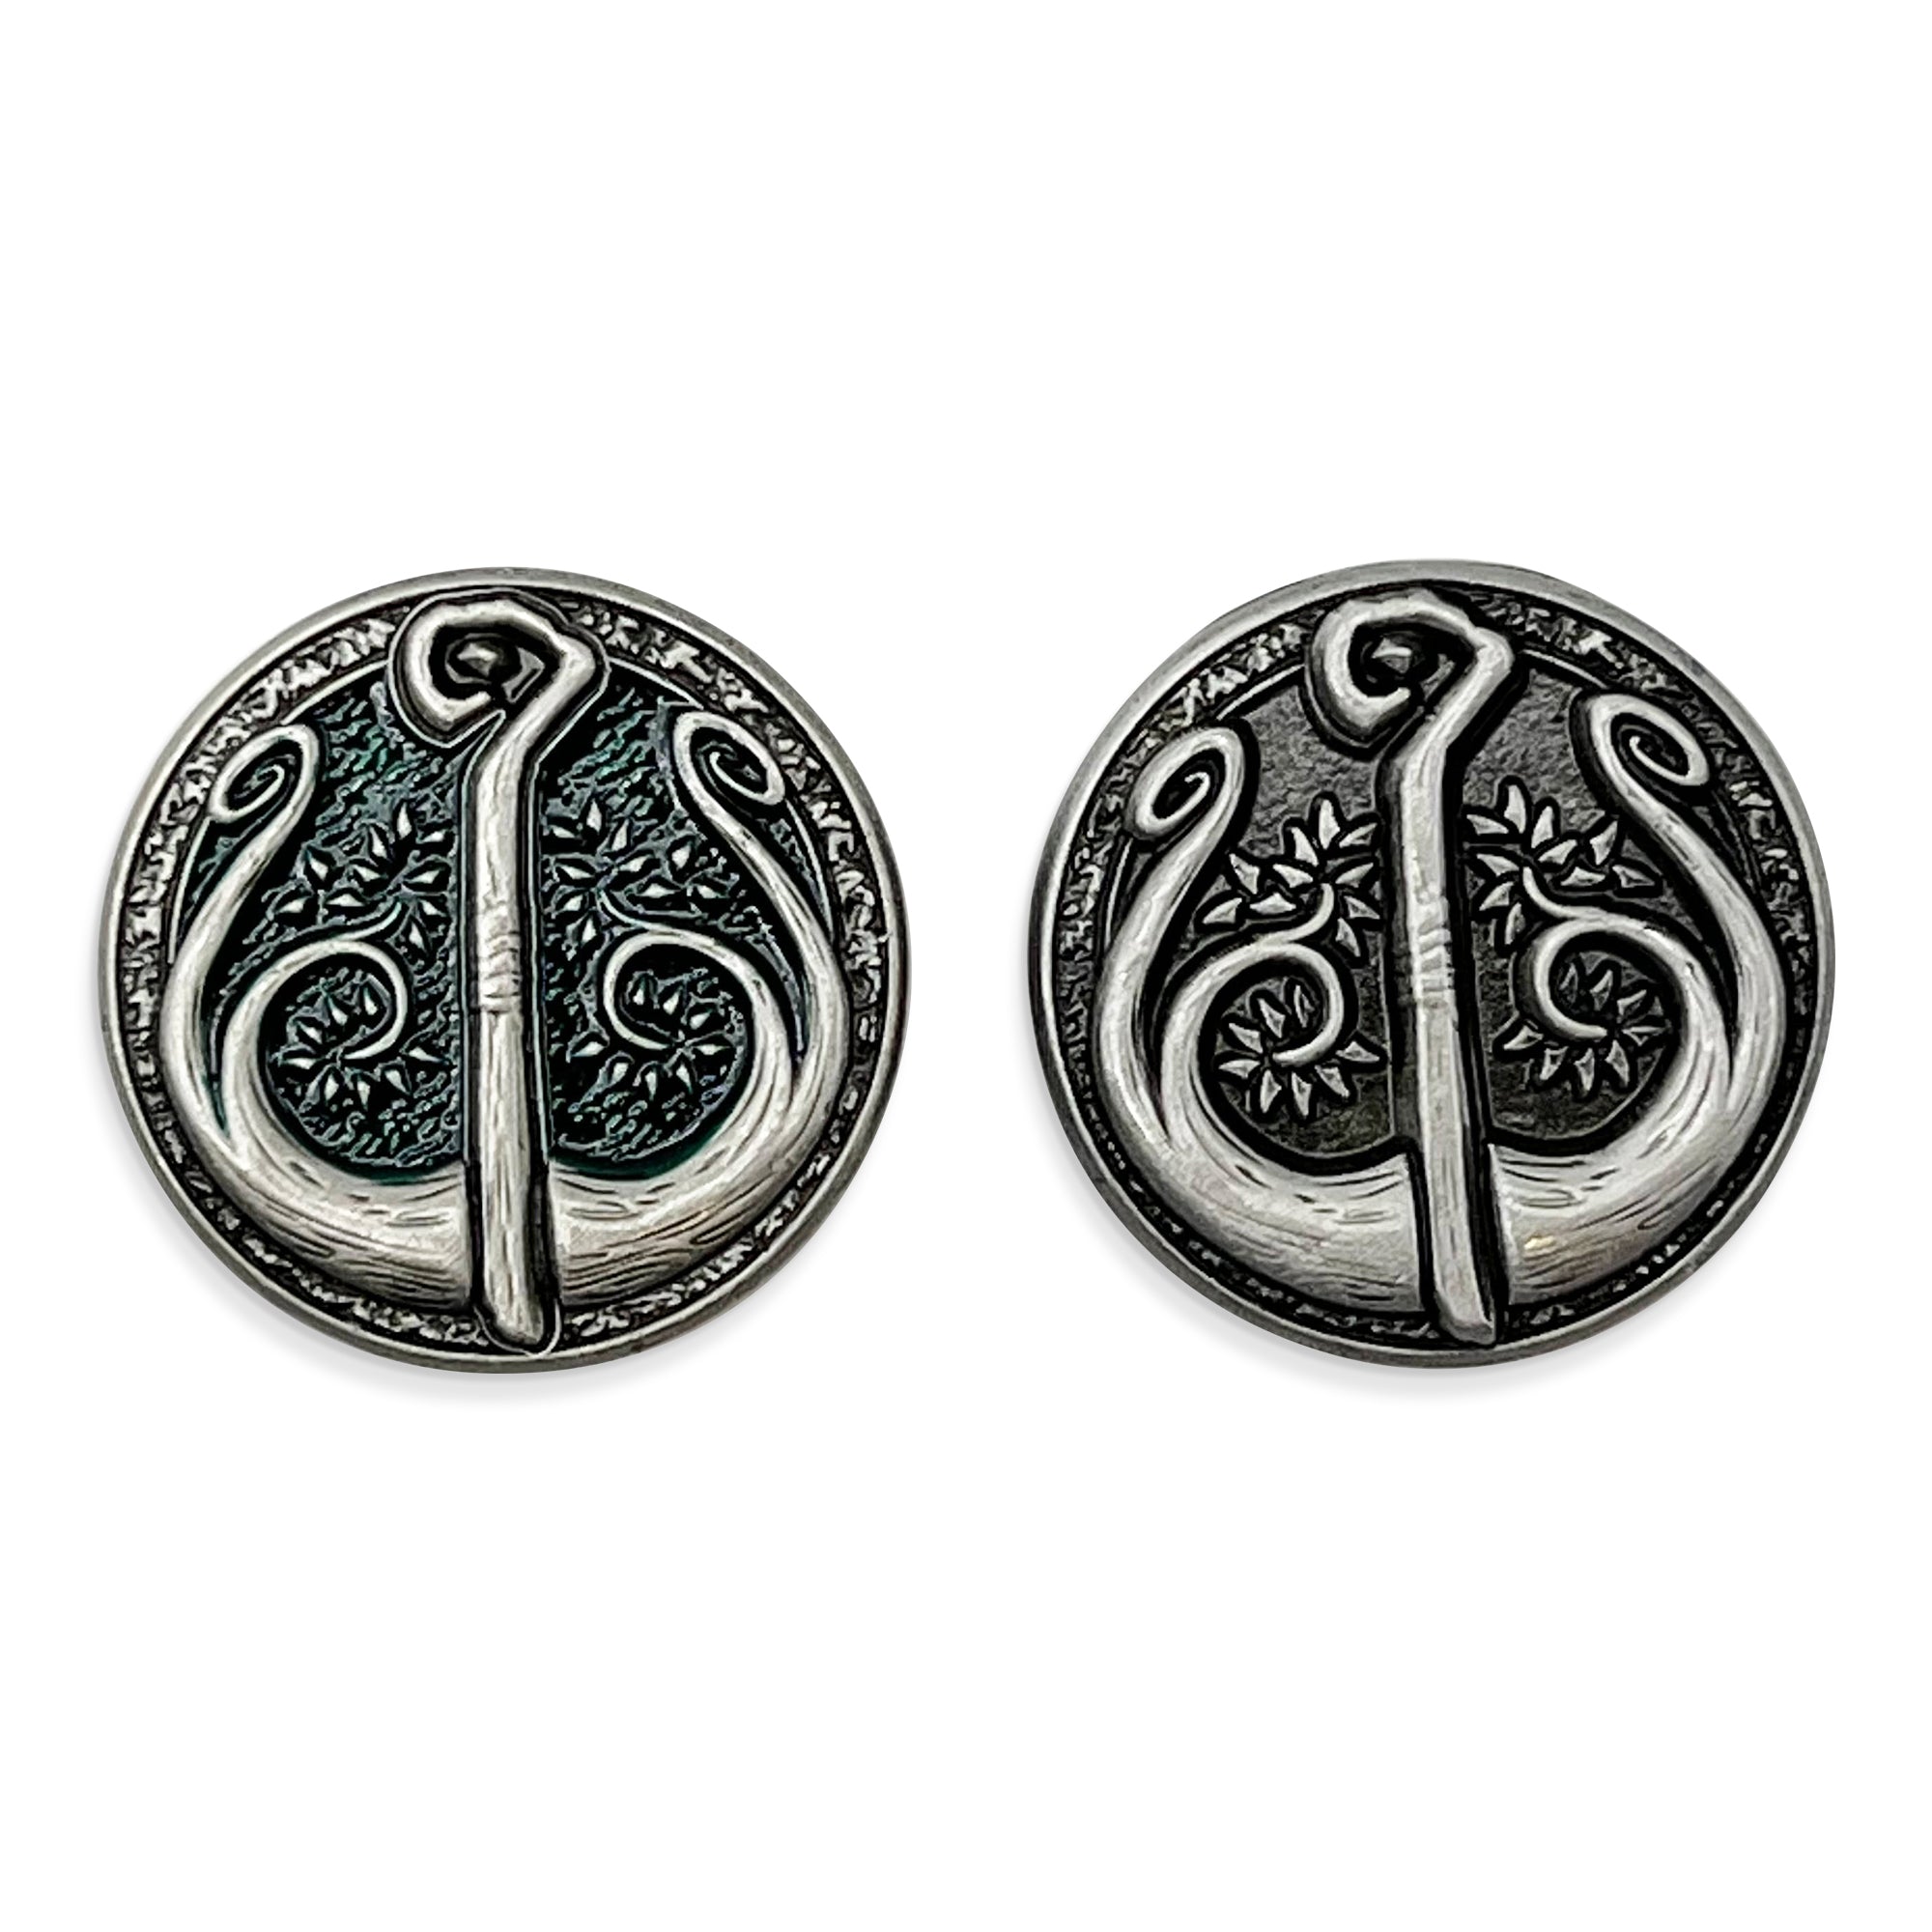 Profession Coins - Druid Metal Coins Set of 10 - NOR 03409